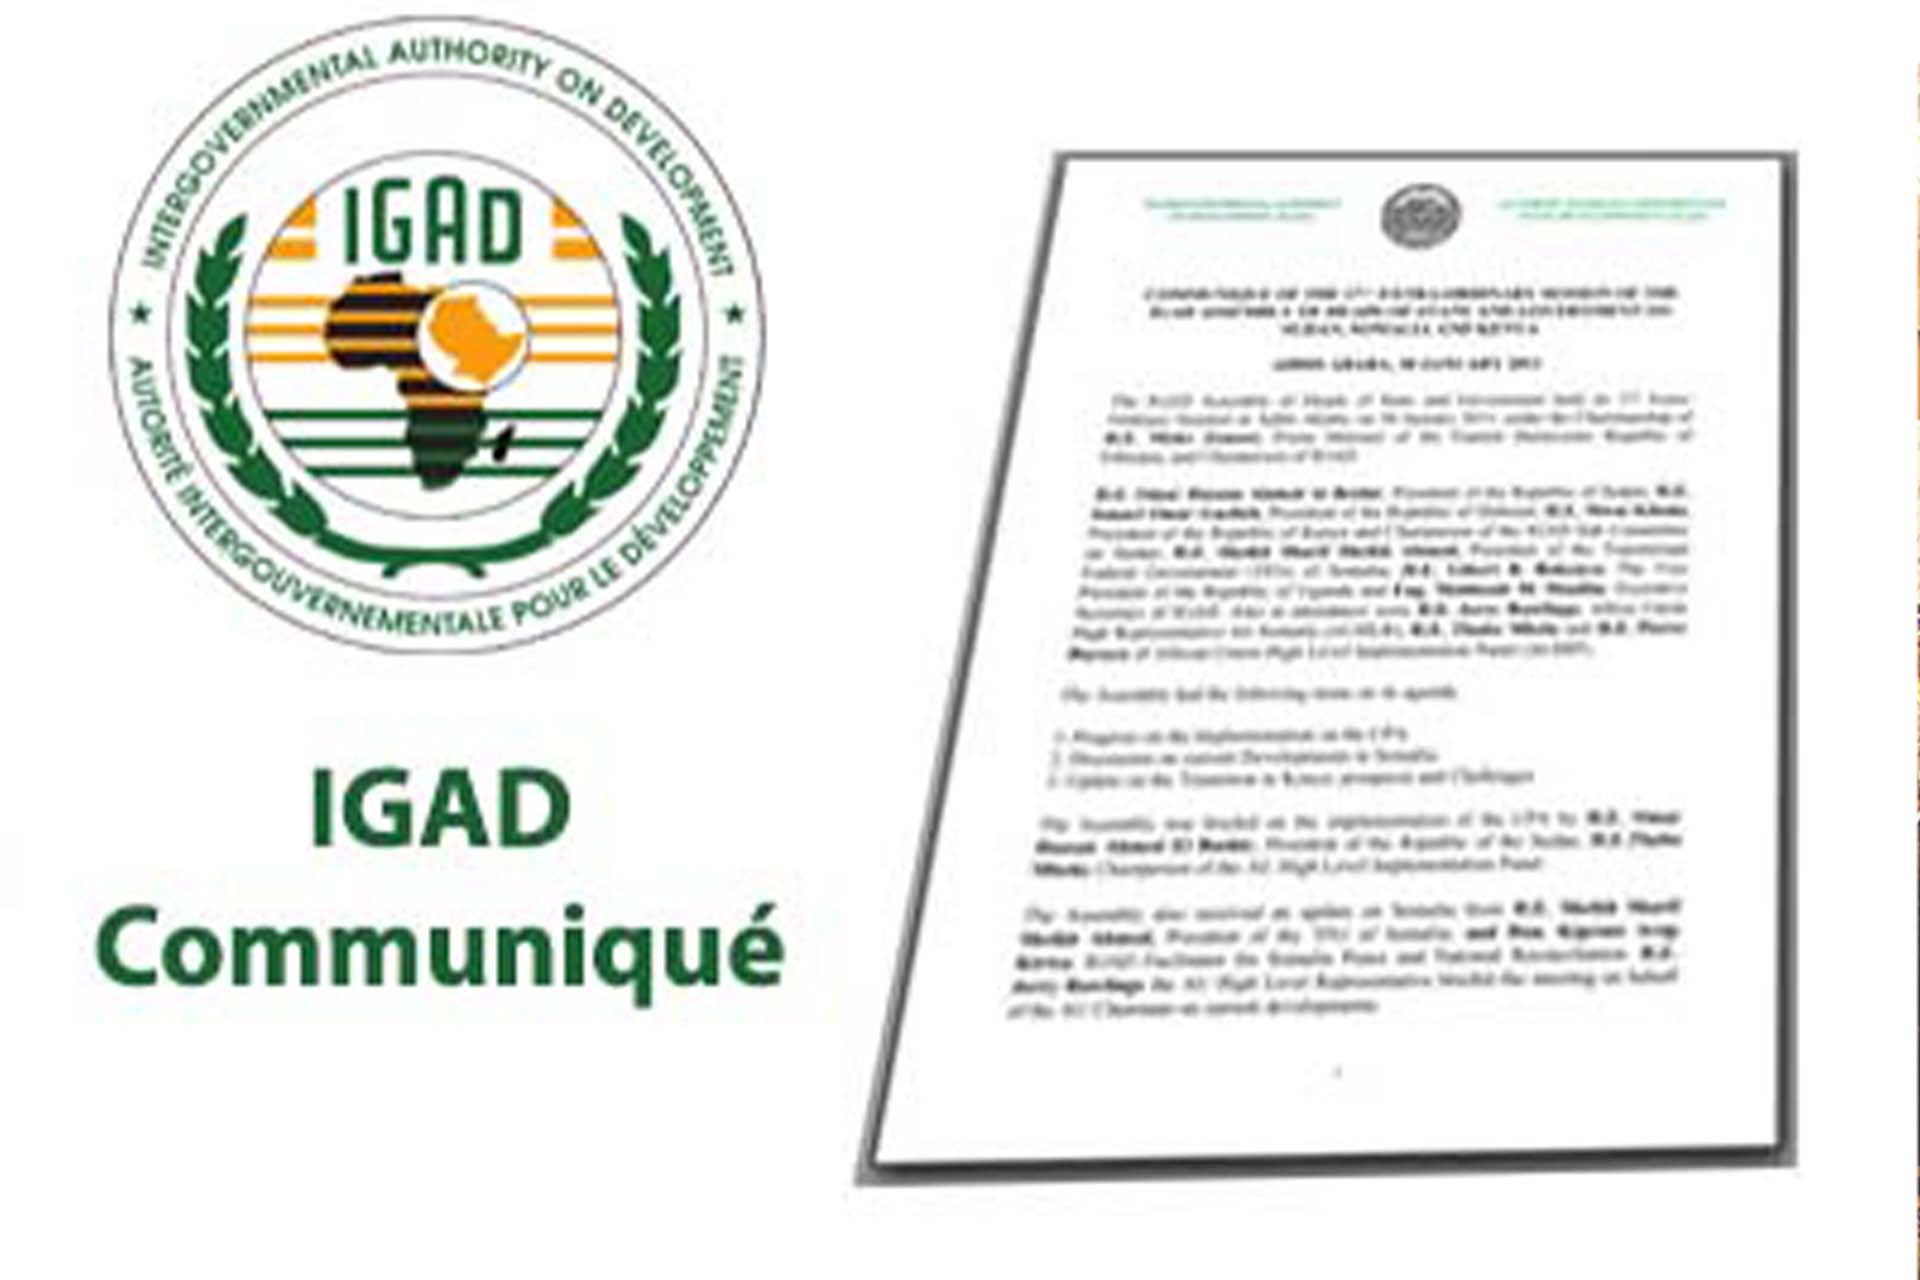 IGAD-EU JOINT COMMUNIQUE: Sixth Ministerial Meeting between the Intergovernmental Authority on Development (IGAD) and the European Union (EU)